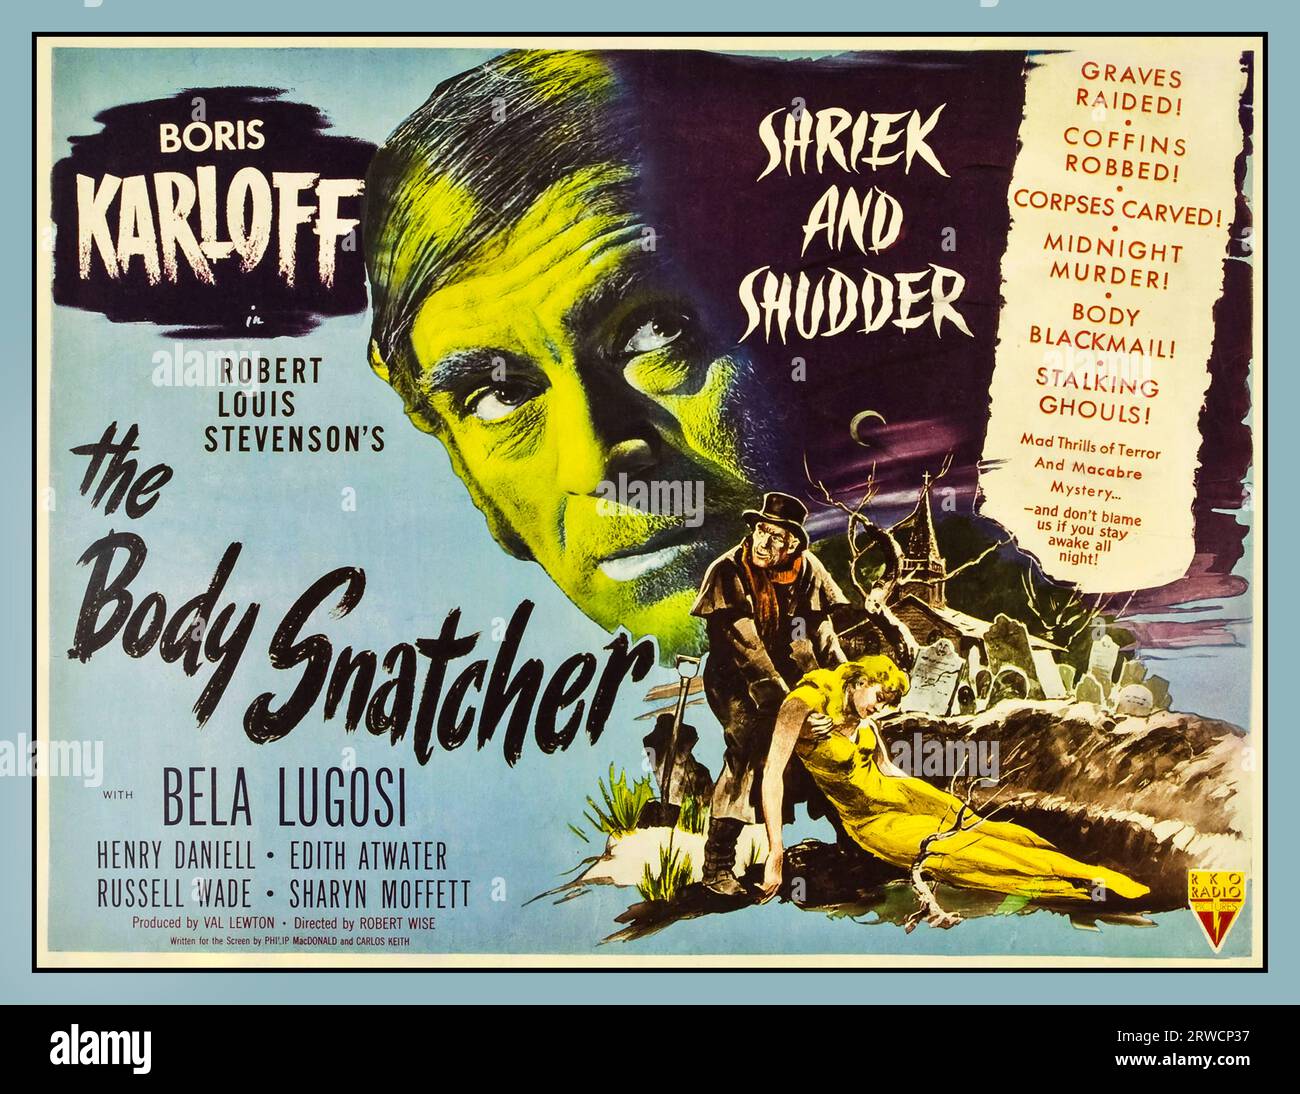 1945 Vintage Movie Poster 'The Body Snatchers' with Boris Karloff, Bella Lugosi RKO Radio Directed by Robert Wise.The Body Snatcher is a 1945 American horror film directed by Robert Wise, based on the 1884 short story of the same name by Robert Louis Stevenson. Philip MacDonald adapted the story for the screen, and producer Val Lewton, credited as 'Carlos Keith', modified MacDonald's screenplay. The film stars Boris Karloff as John Gray, a cab driver who moonlights as a grave robber, and later murderer, to illegally supply Dr. MacFarlane (played by Henry Daniell) with cadavers for his classes. Stock Photo